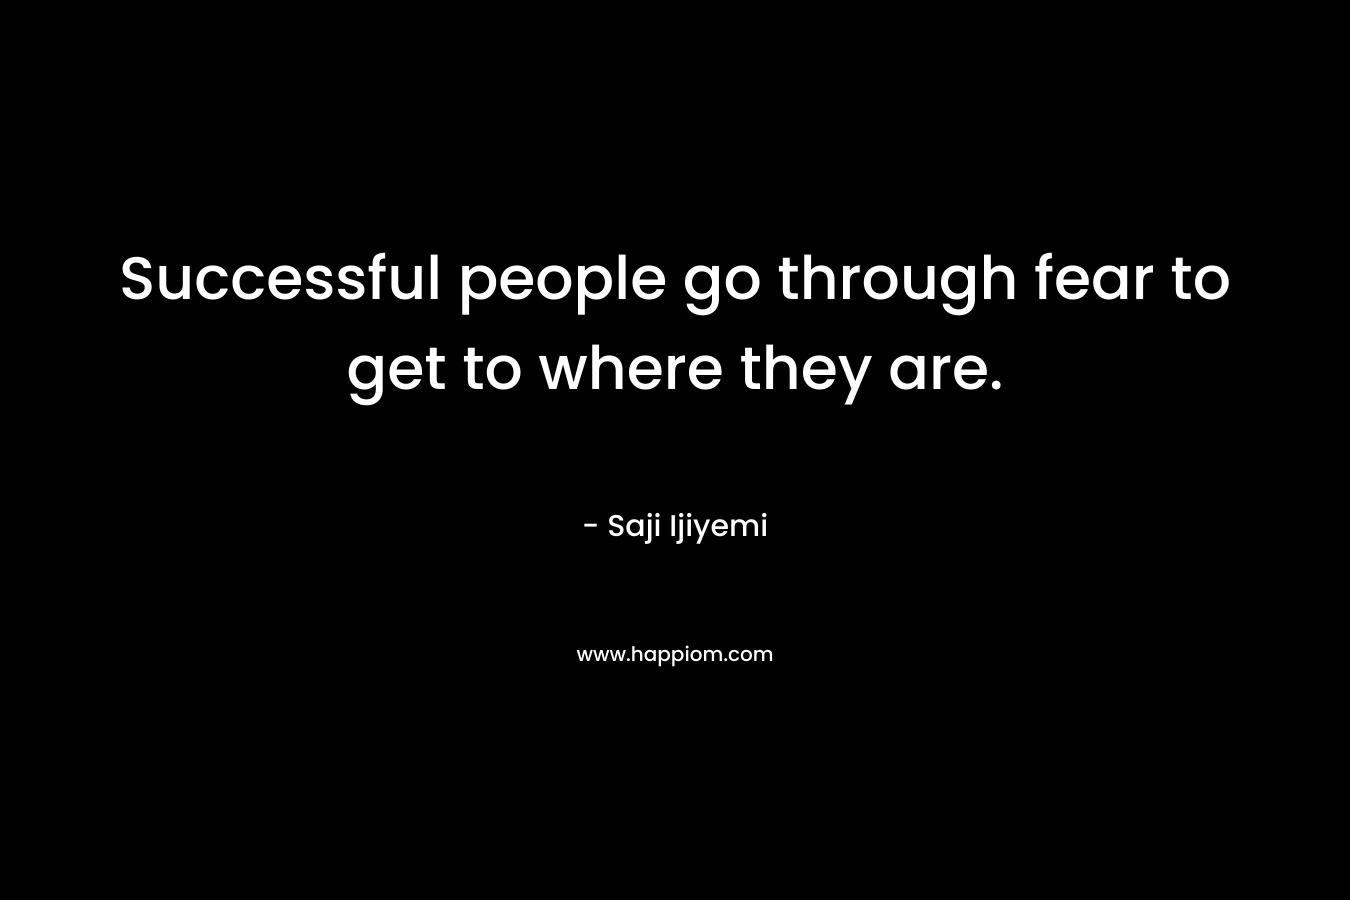 Successful people go through fear to get to where they are.